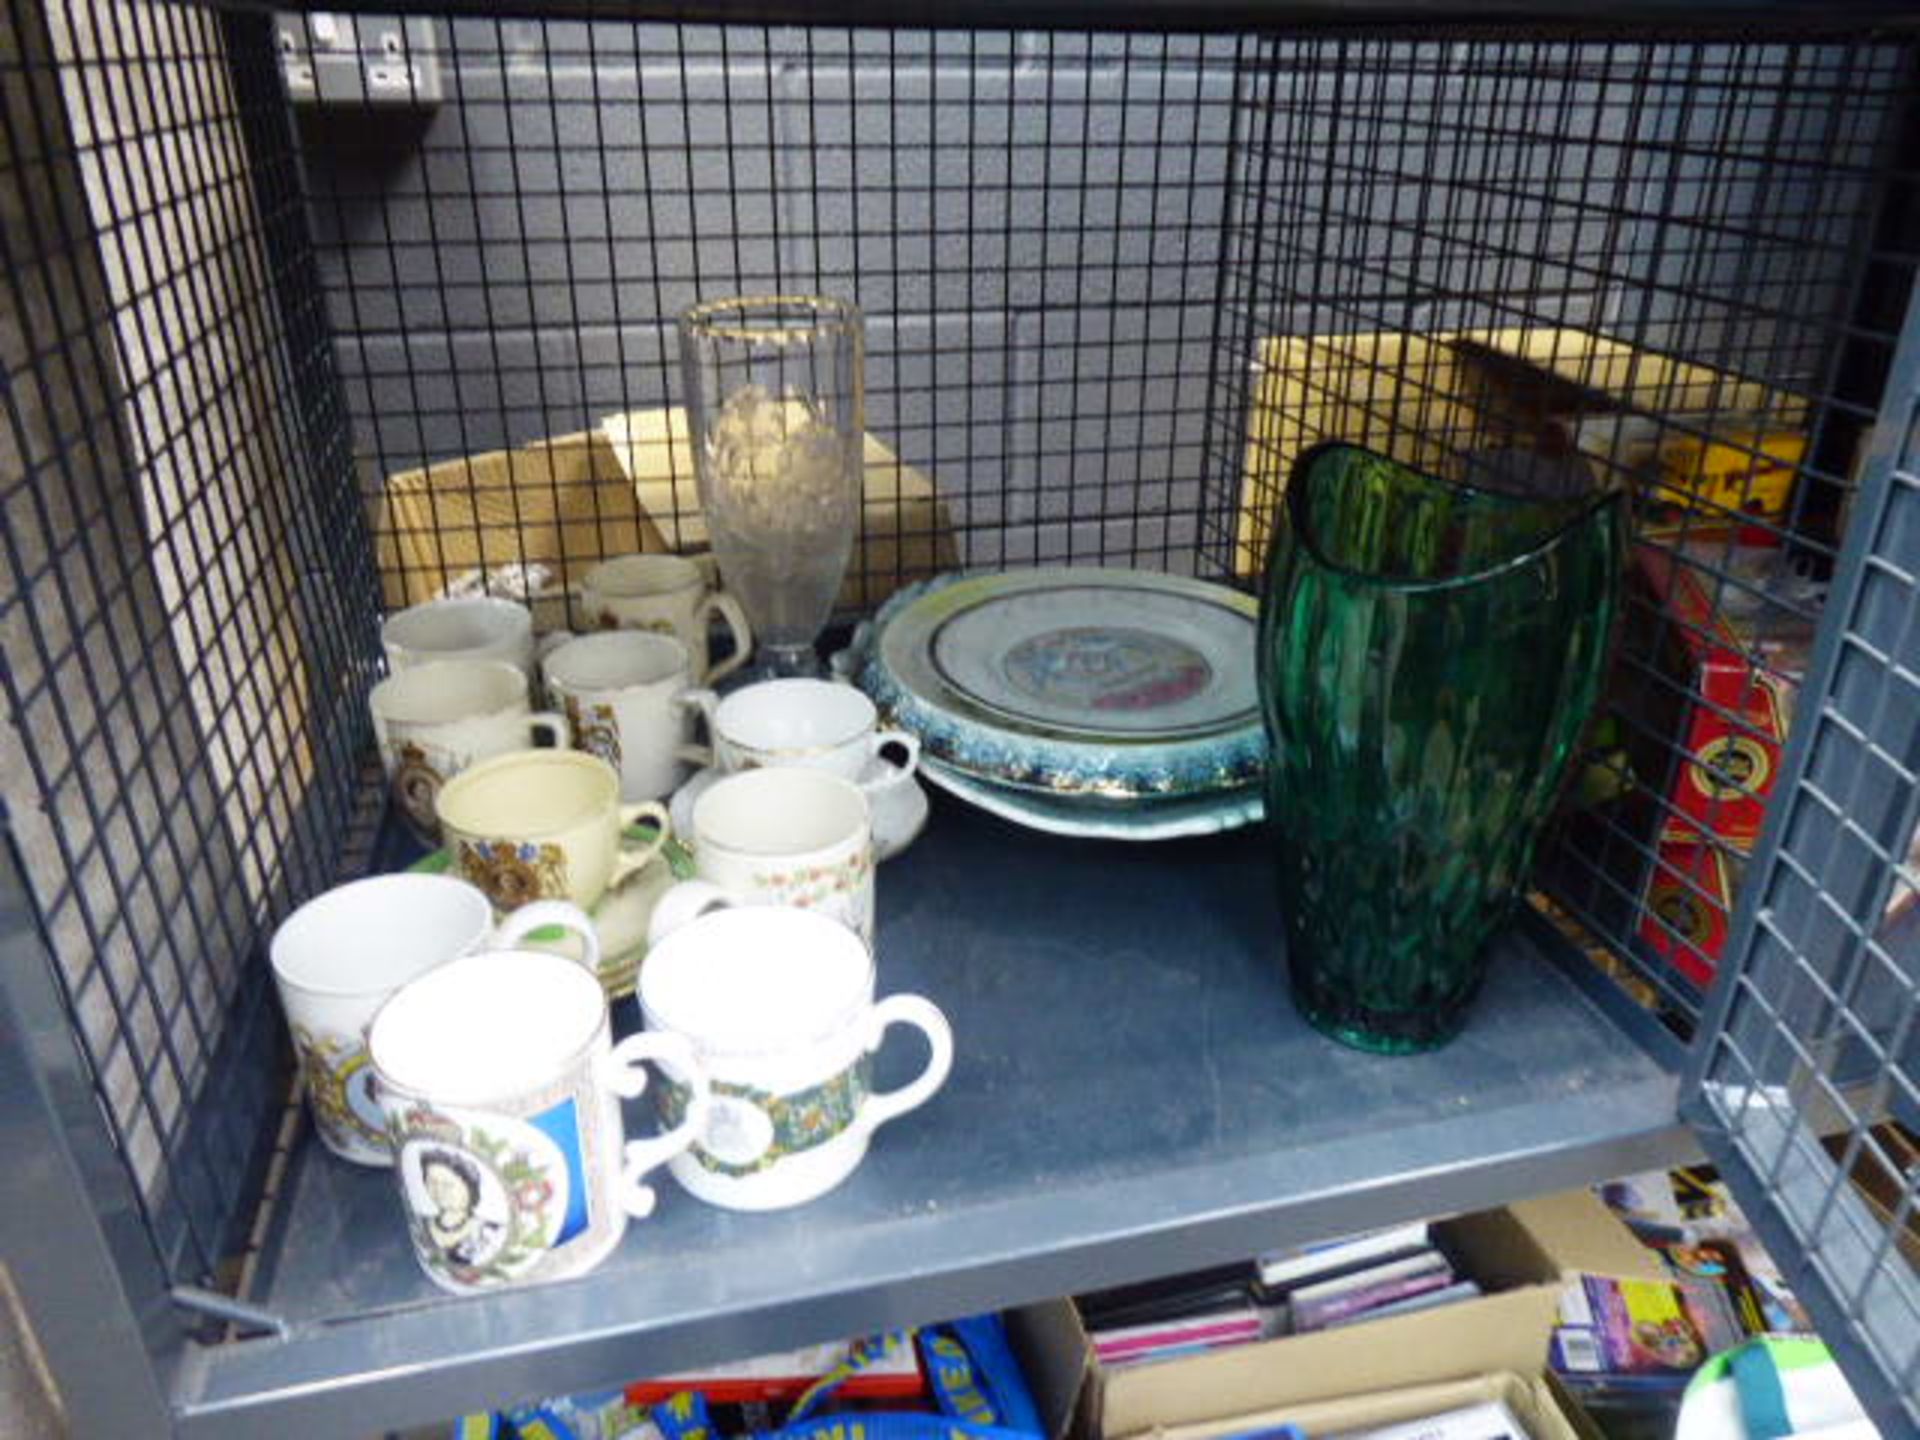 5414 Cage containing commemorative mugs, plates and glassware